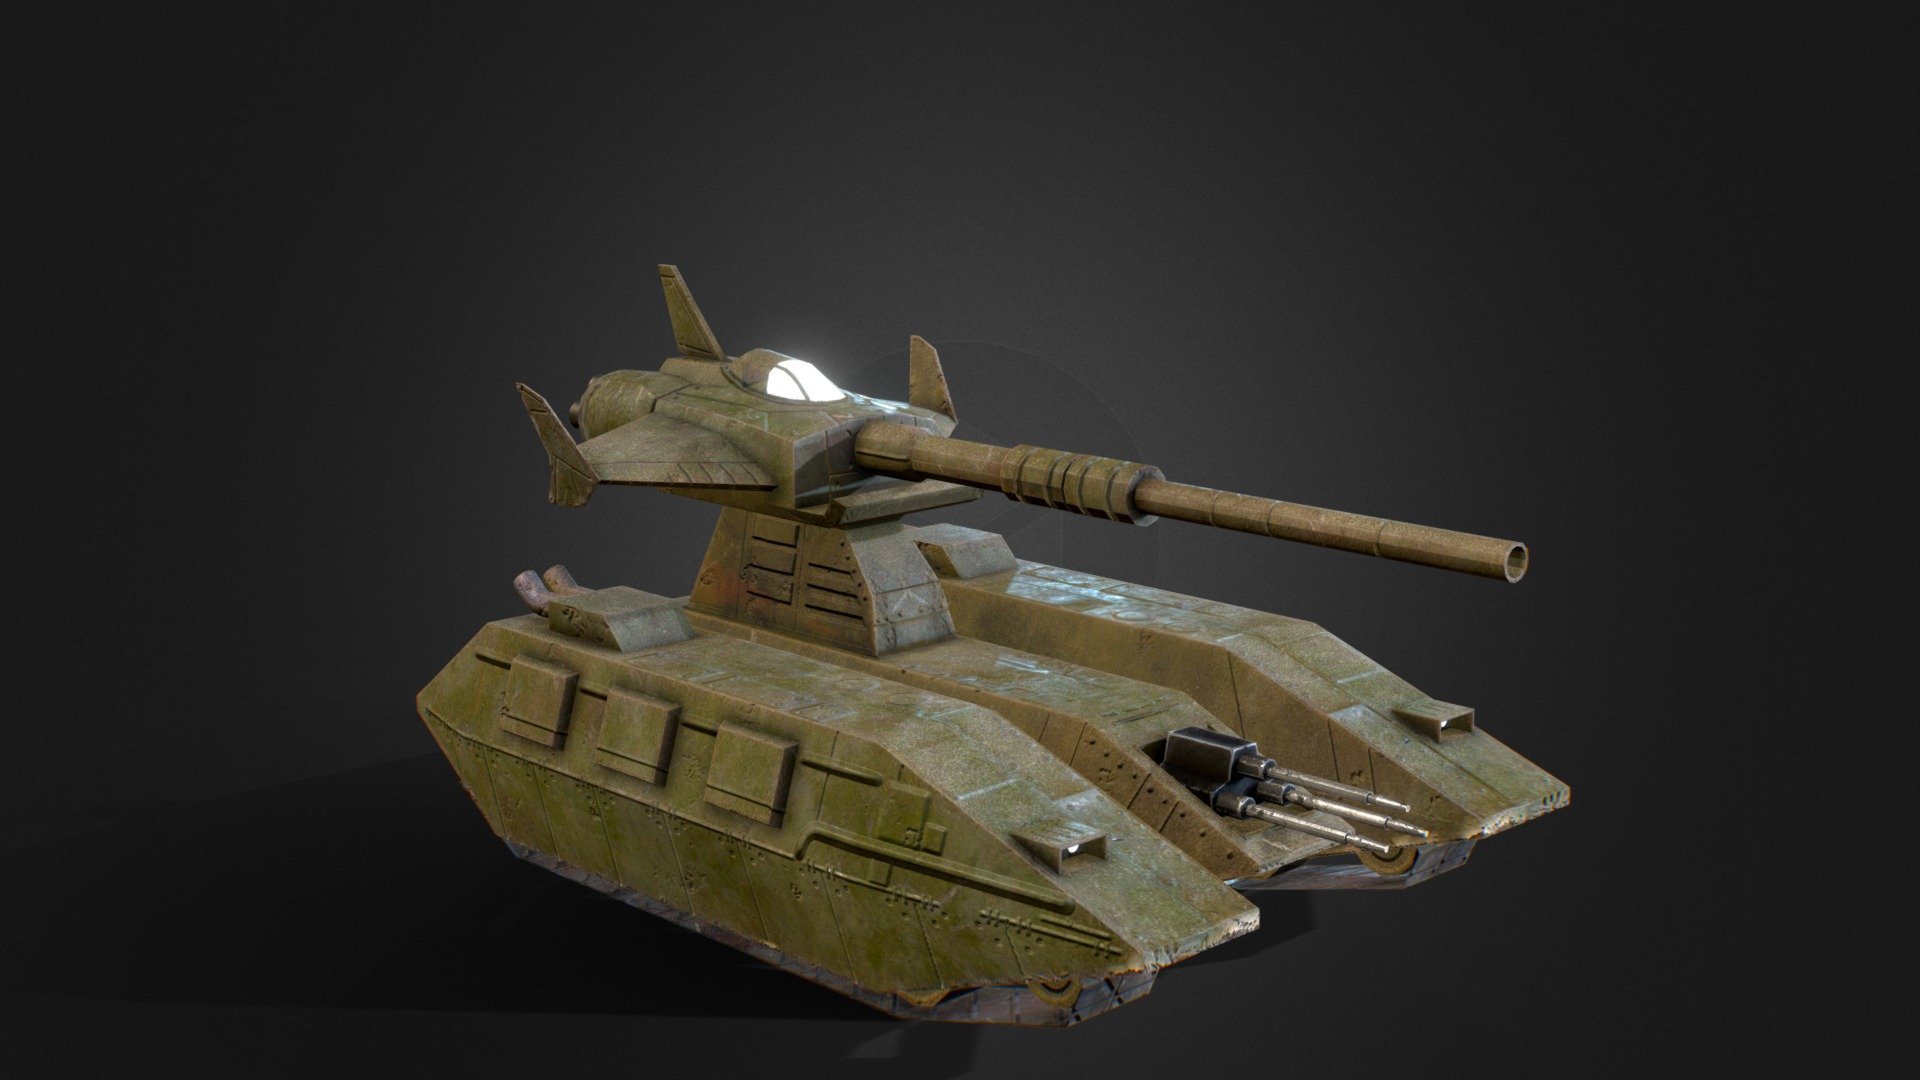 This model was made for One Year War mod of Hearts of Iron IV.
Our Mod Steam Home Page
https://steamcommunity.com/sharedfiles/filedetails/?id=2064985570 - Magella Attack - 3D model by One Year War Mod (@hoi4oneyearwar) 3d model